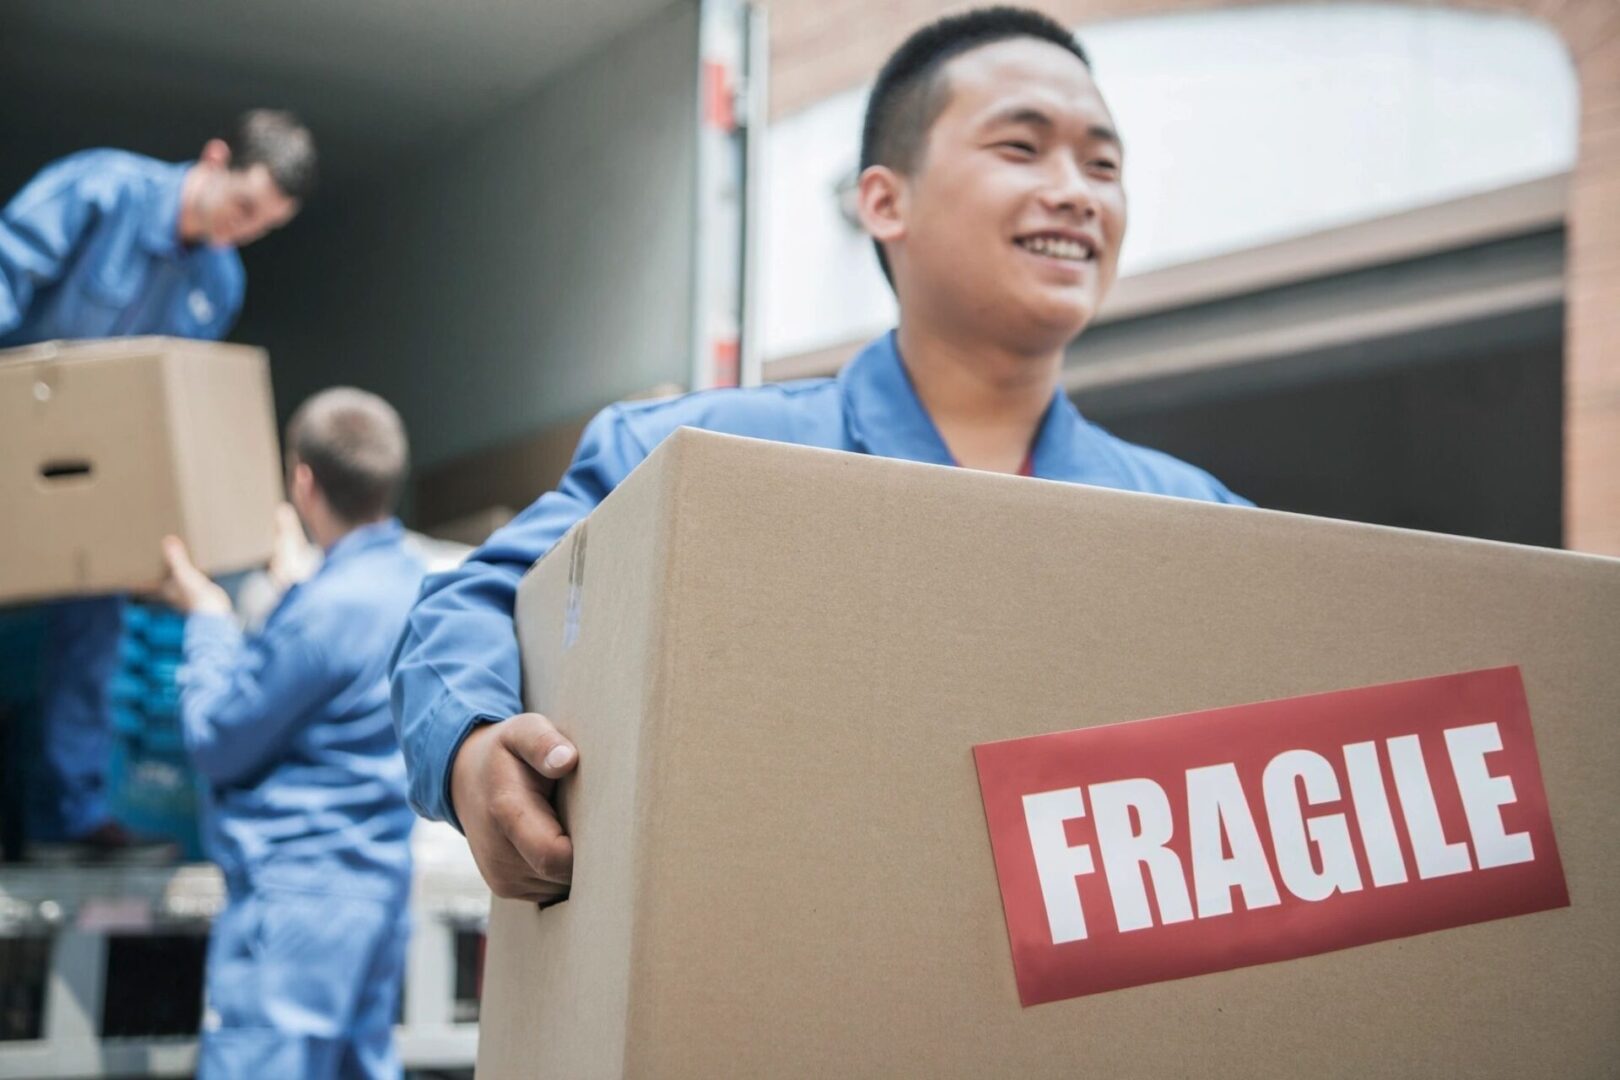 Movers unloading a moving van and carrying a fragile box